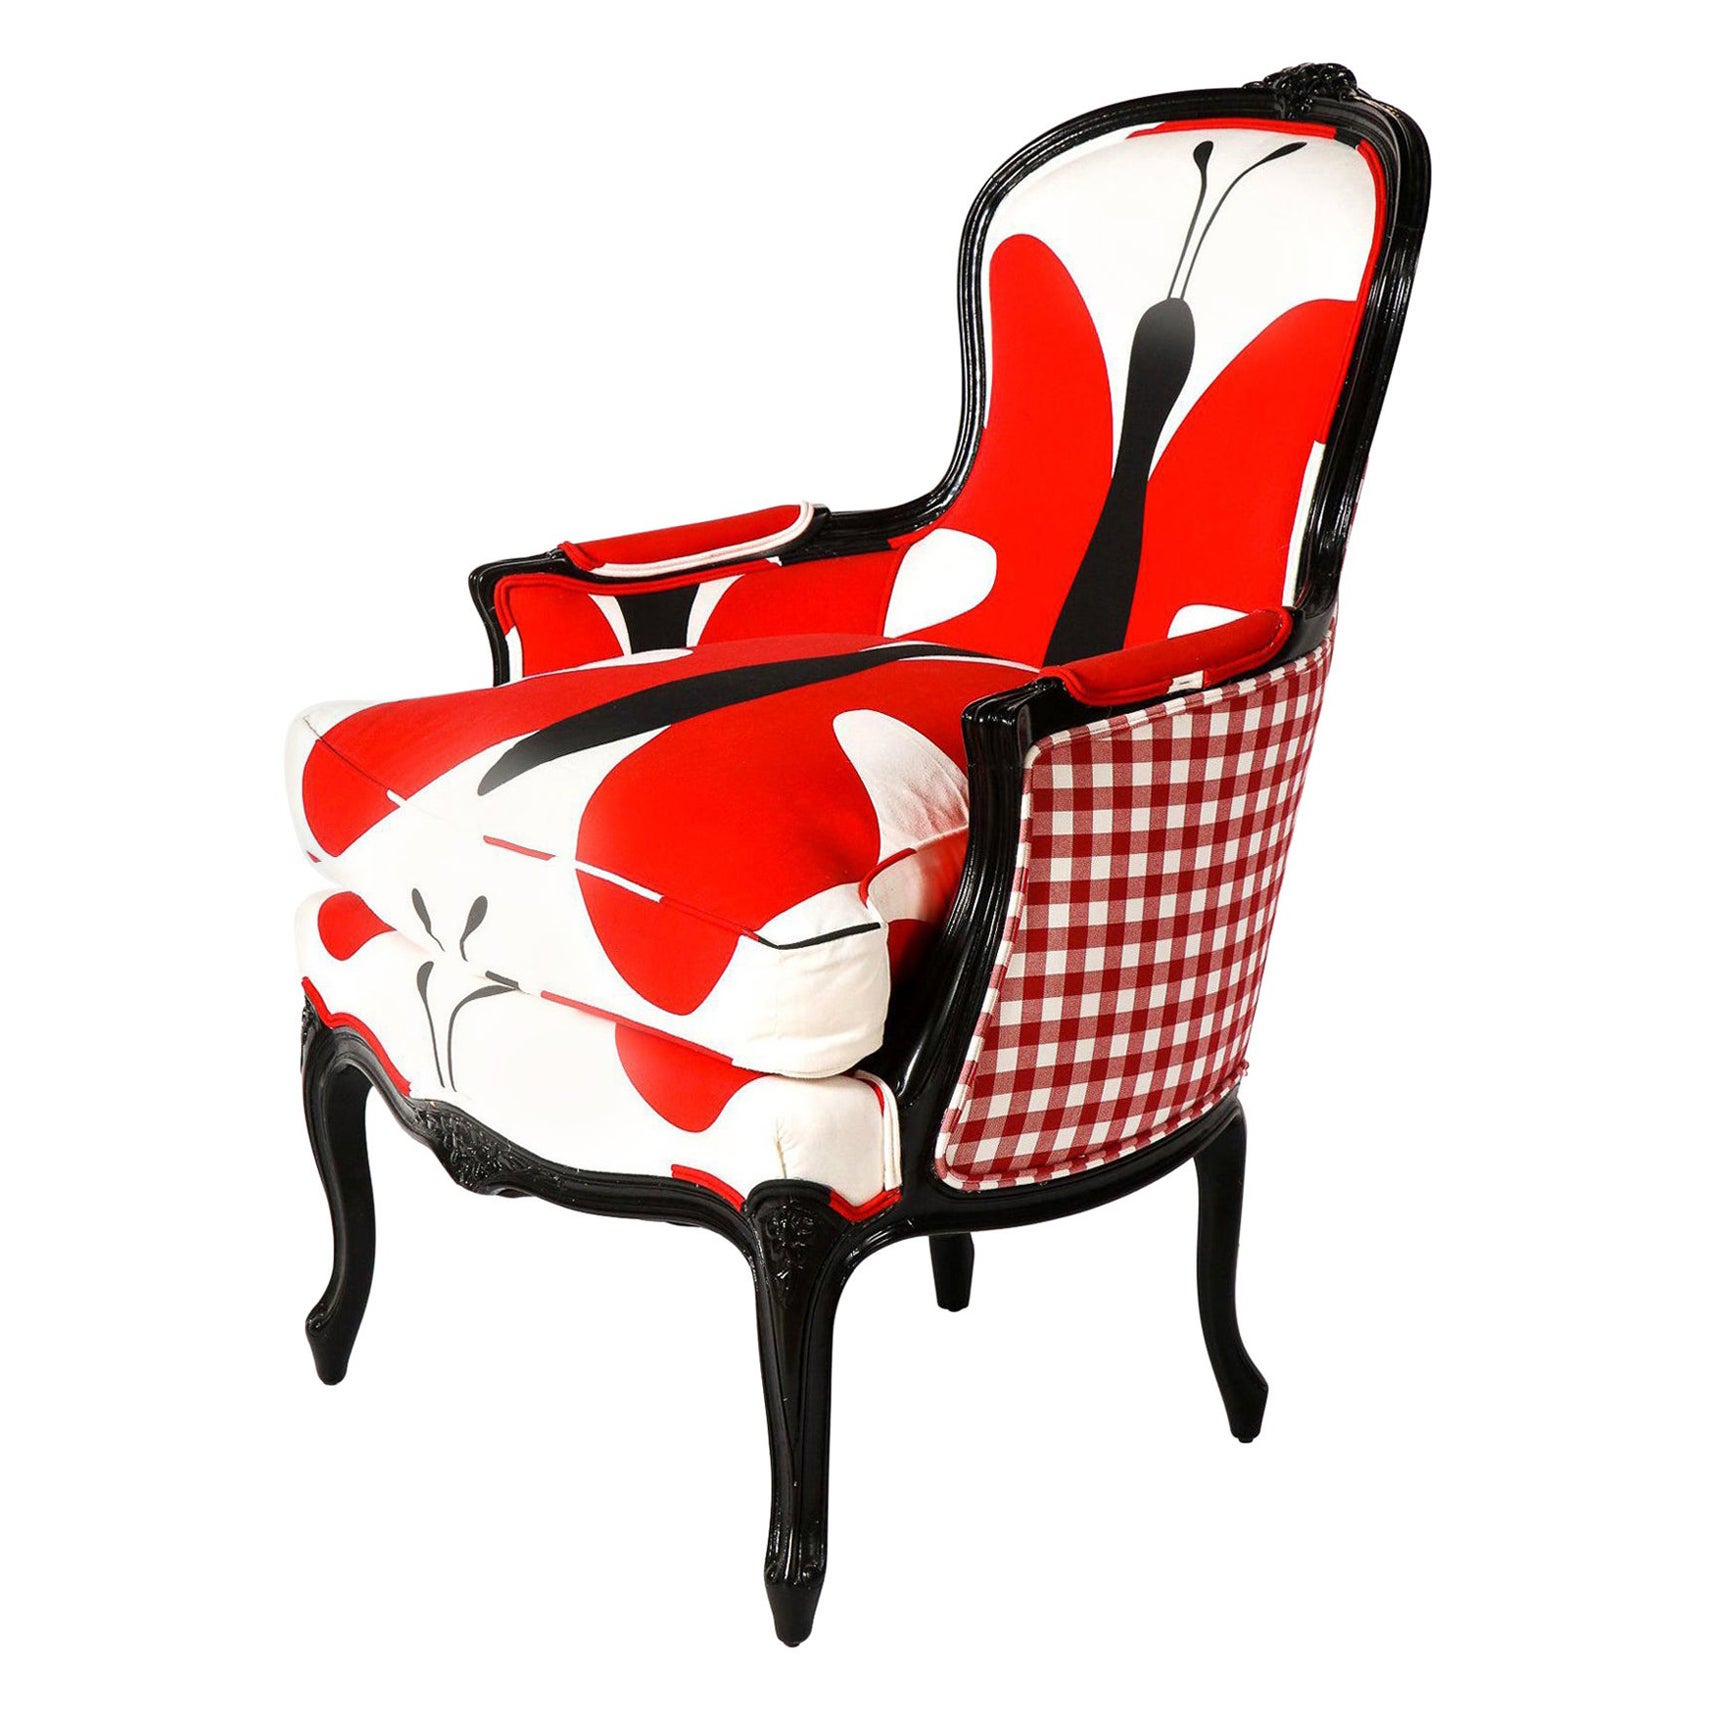 Bergère Chair with Black Lacquered Wood, Red/White & Black Printed Fabrics